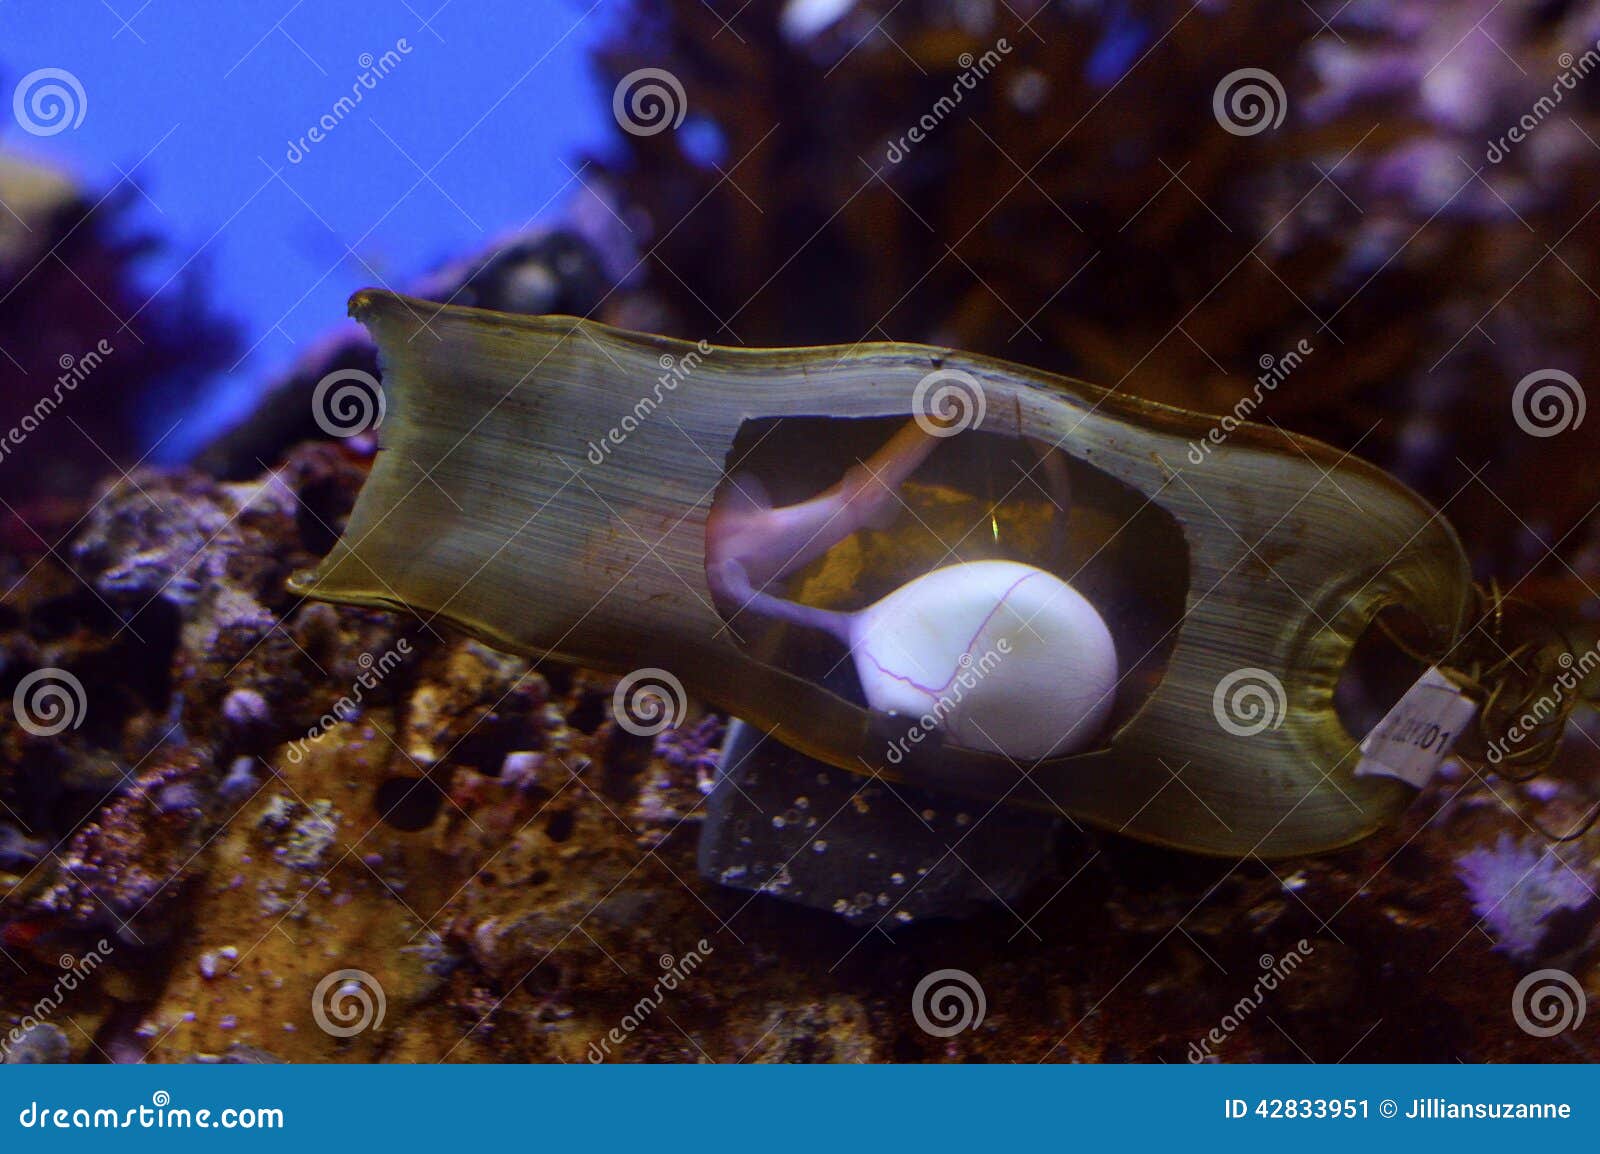 shark egg close up eggs sometimes referred to as mermaid s purses embryo can be clearly seen s 42833951